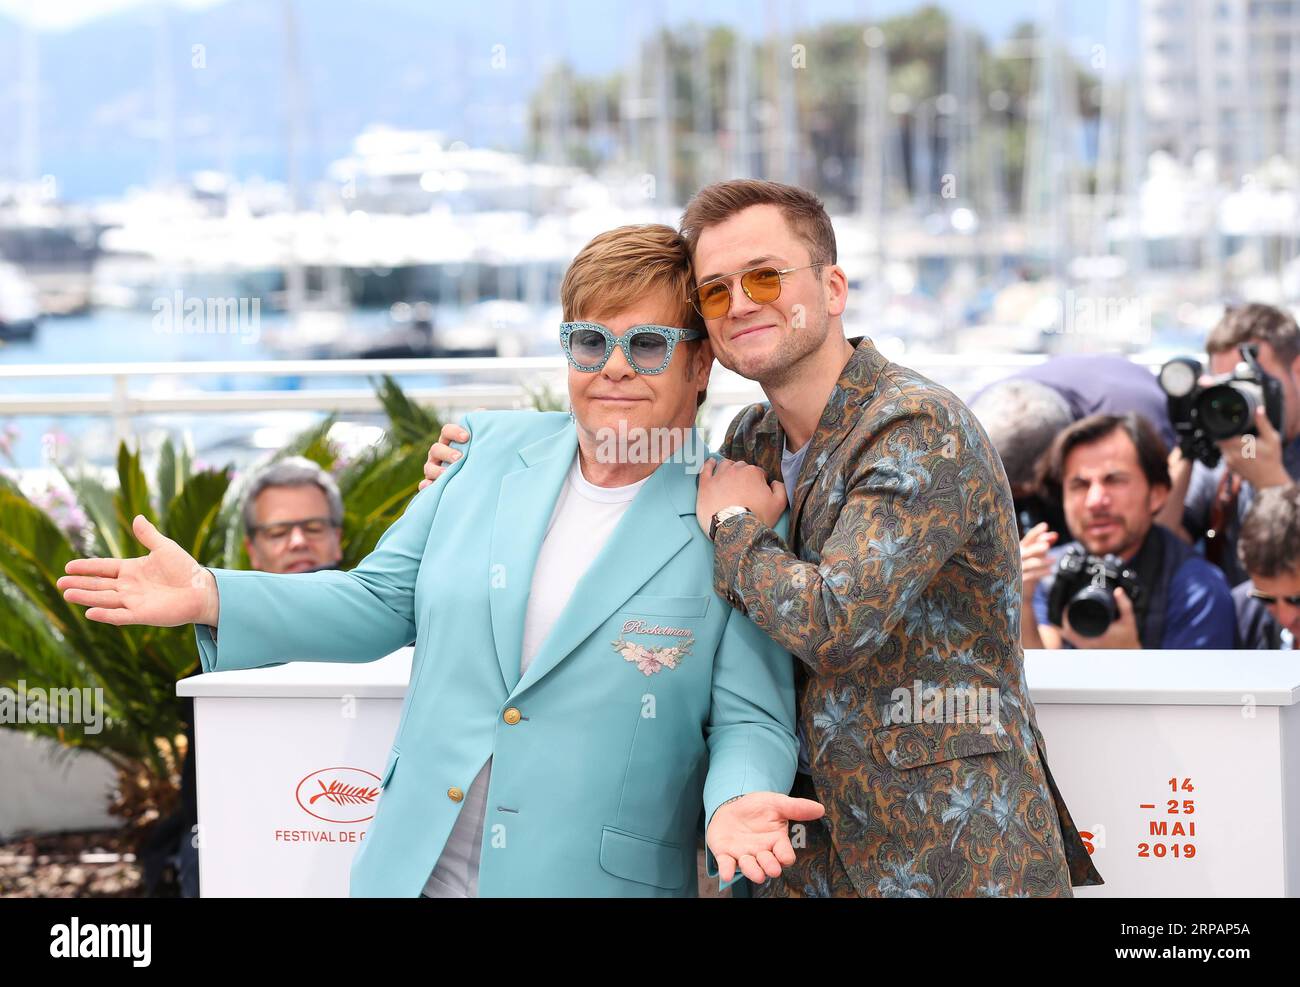 (190516) -- CANNES, May 16, 2019 (Xinhua) -- Producer Elton John and actor Taron Egerton pose during a photocall for the film Rocketman screened in the Hors Competition section during the 72nd Cannes Film Festival in Cannes, France, May 16, 2019. (Xinhua/Zhang Cheng) FRANCE-CANNES-FILM FESTIVAL-PHOTOCALL-ROCKETMAN PUBLICATIONxNOTxINxCHN Stock Photo